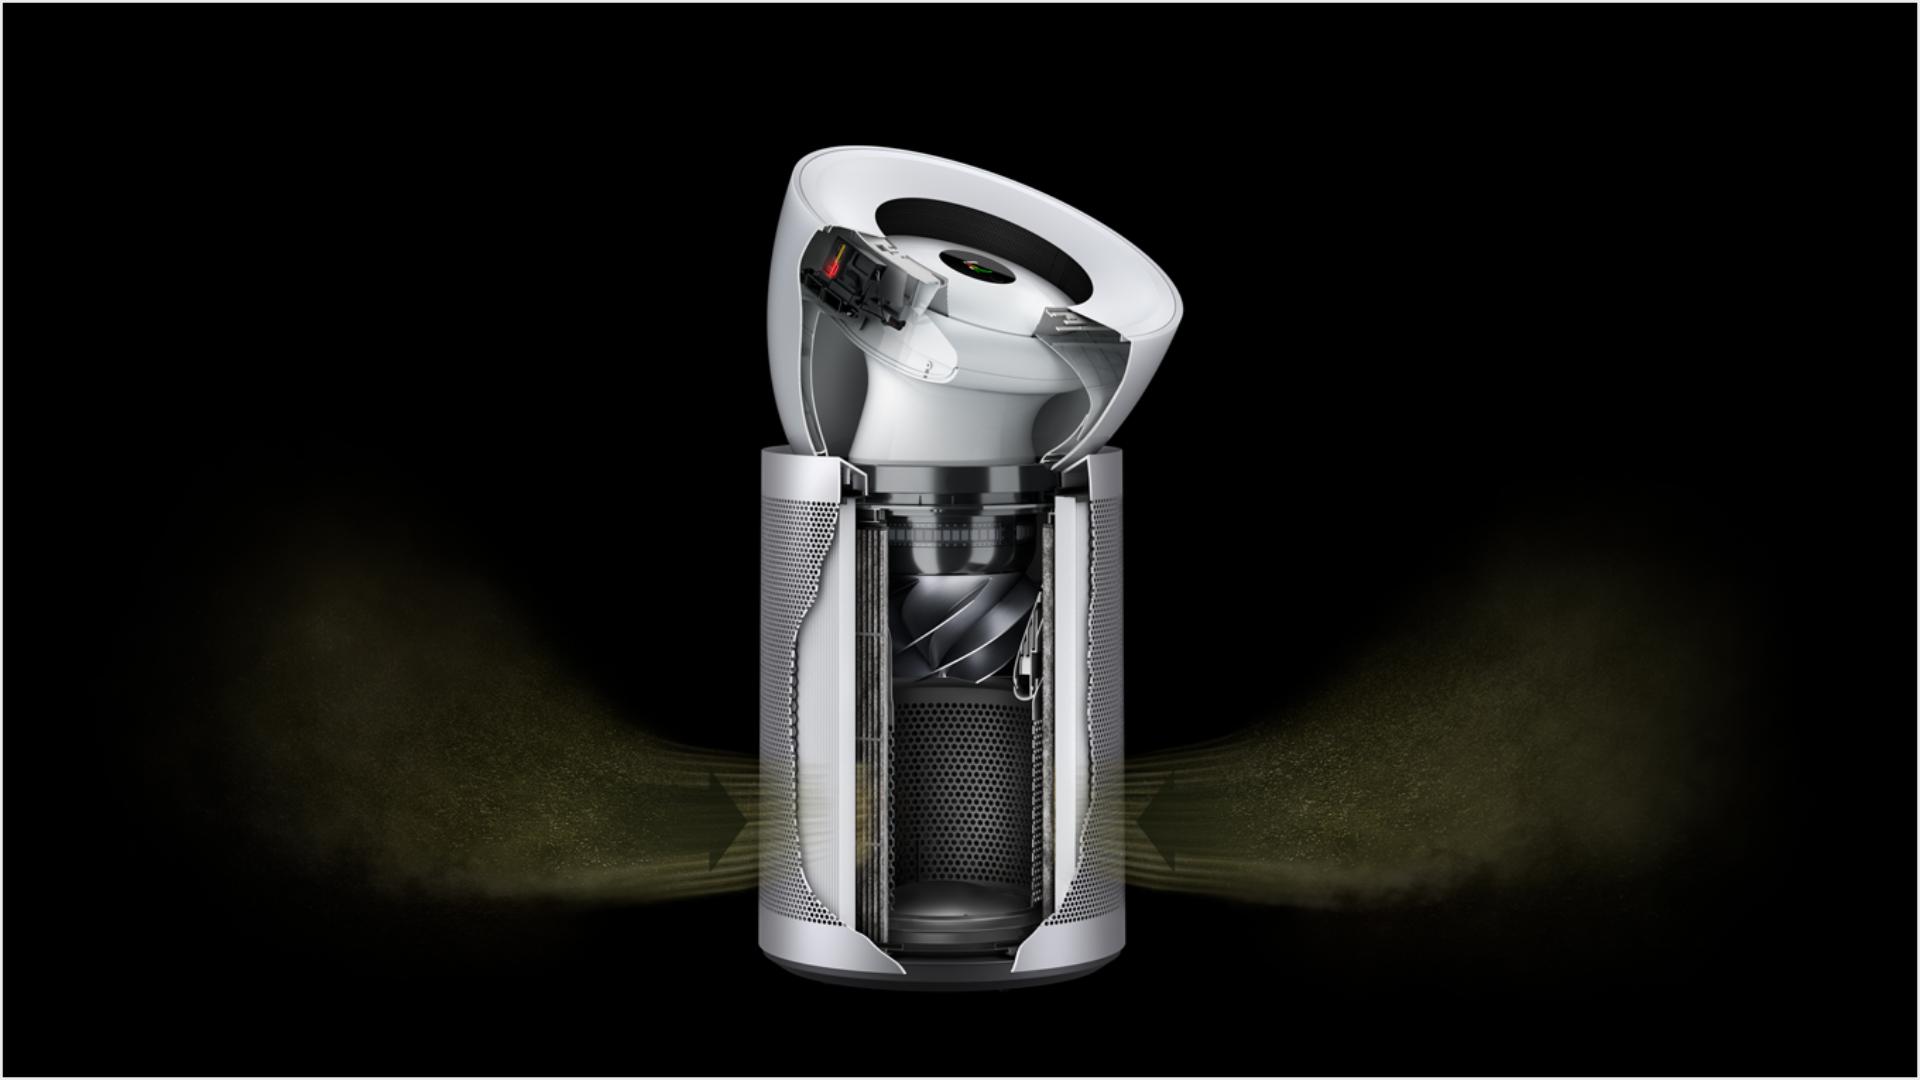 Inside view of the Dyson Purifier Big+Quiet technology.